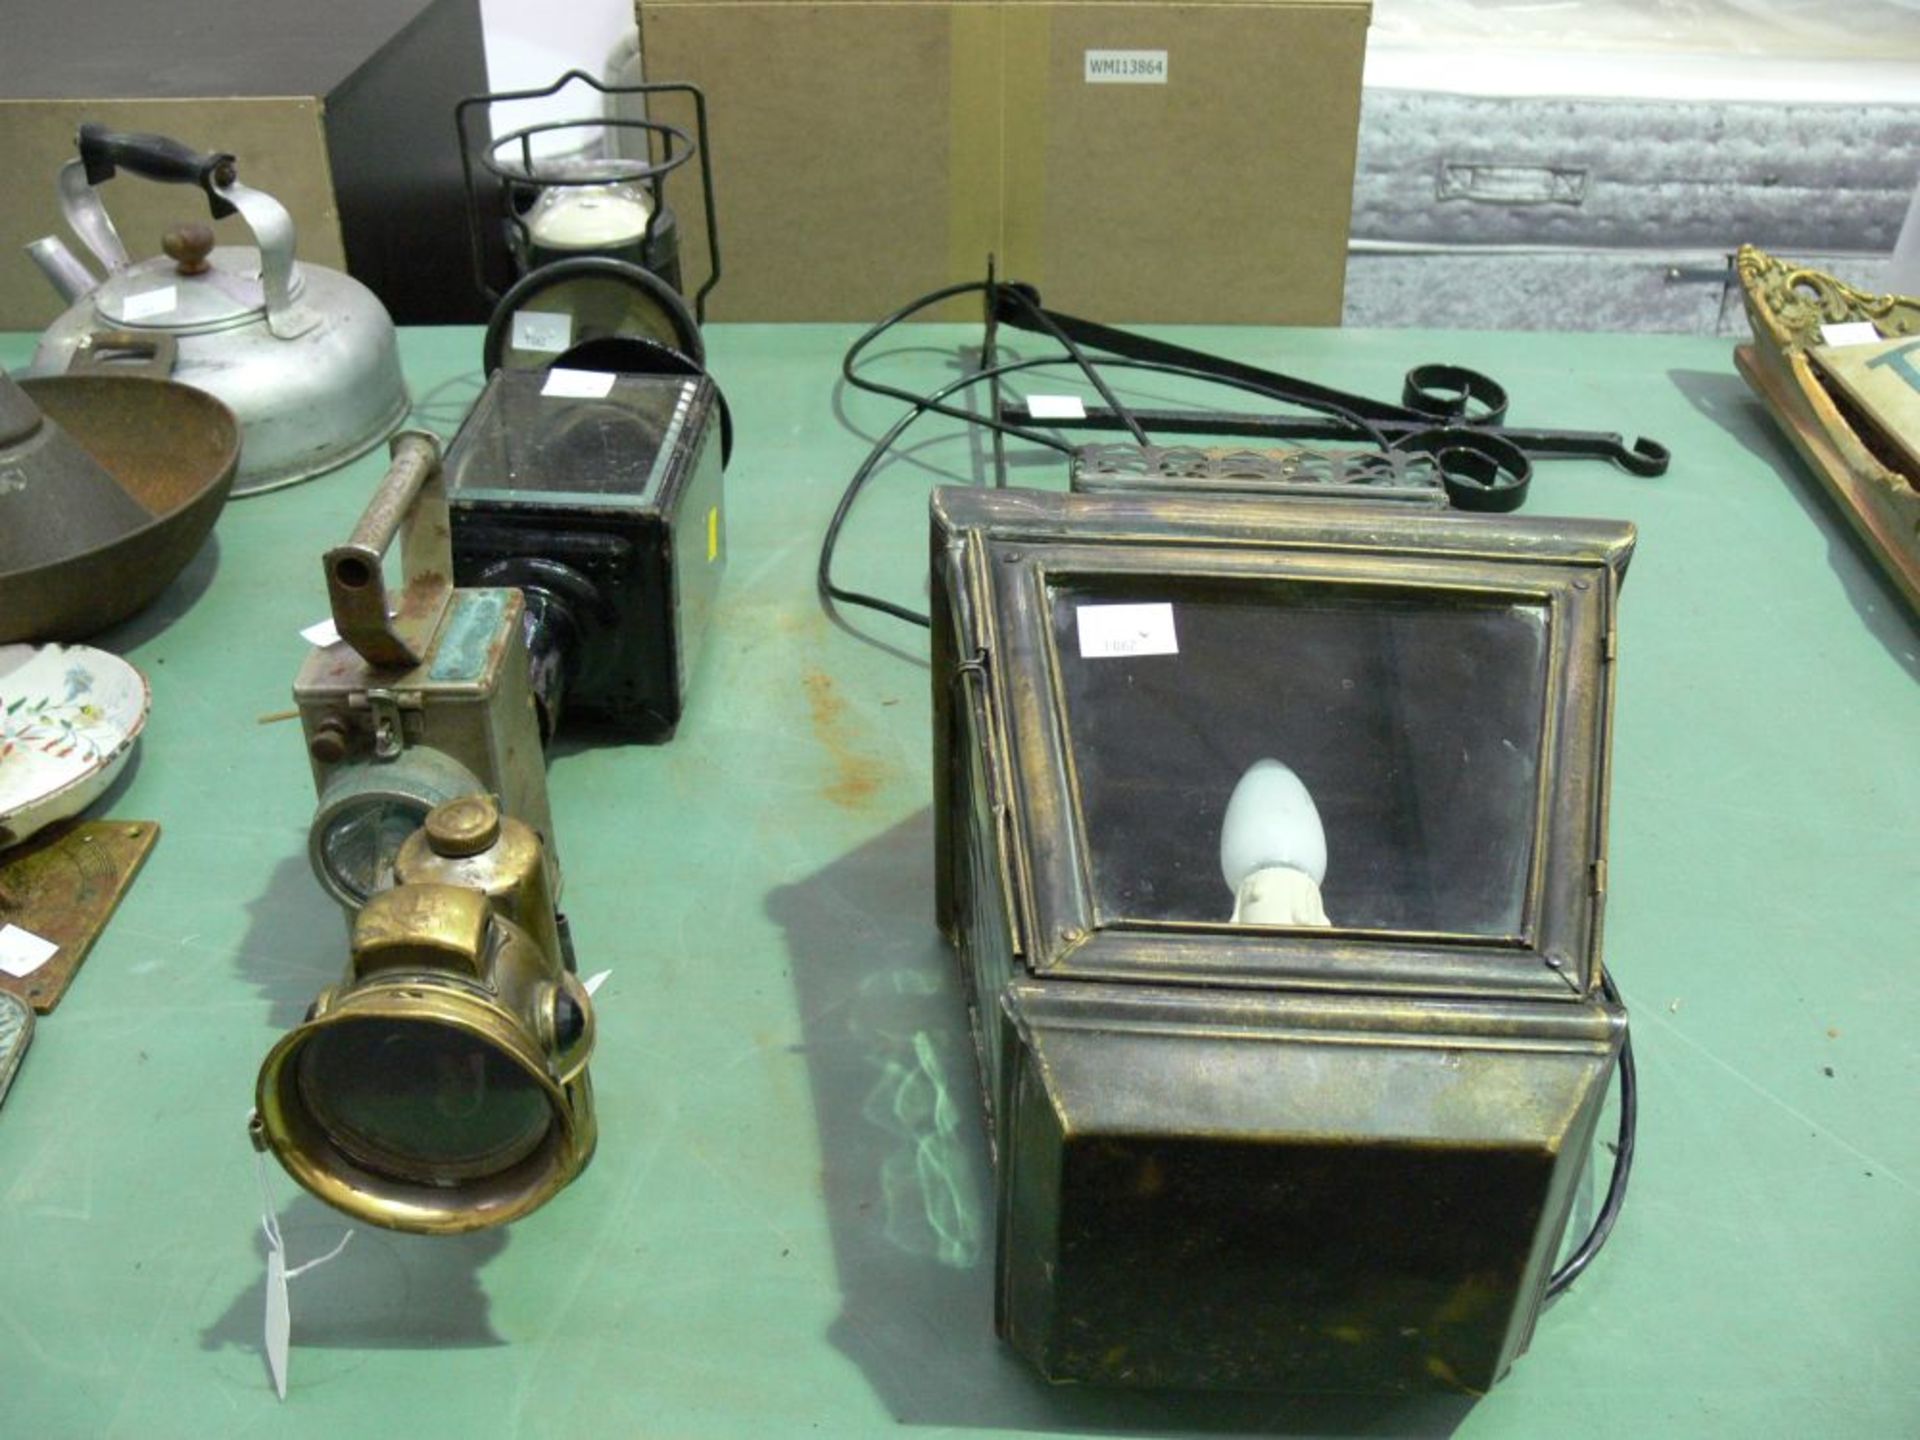 Brass Cased (Miller) Hanging Lamp, Coach Lamp (Stadium-British Made), Cycle Light, Two Torches (